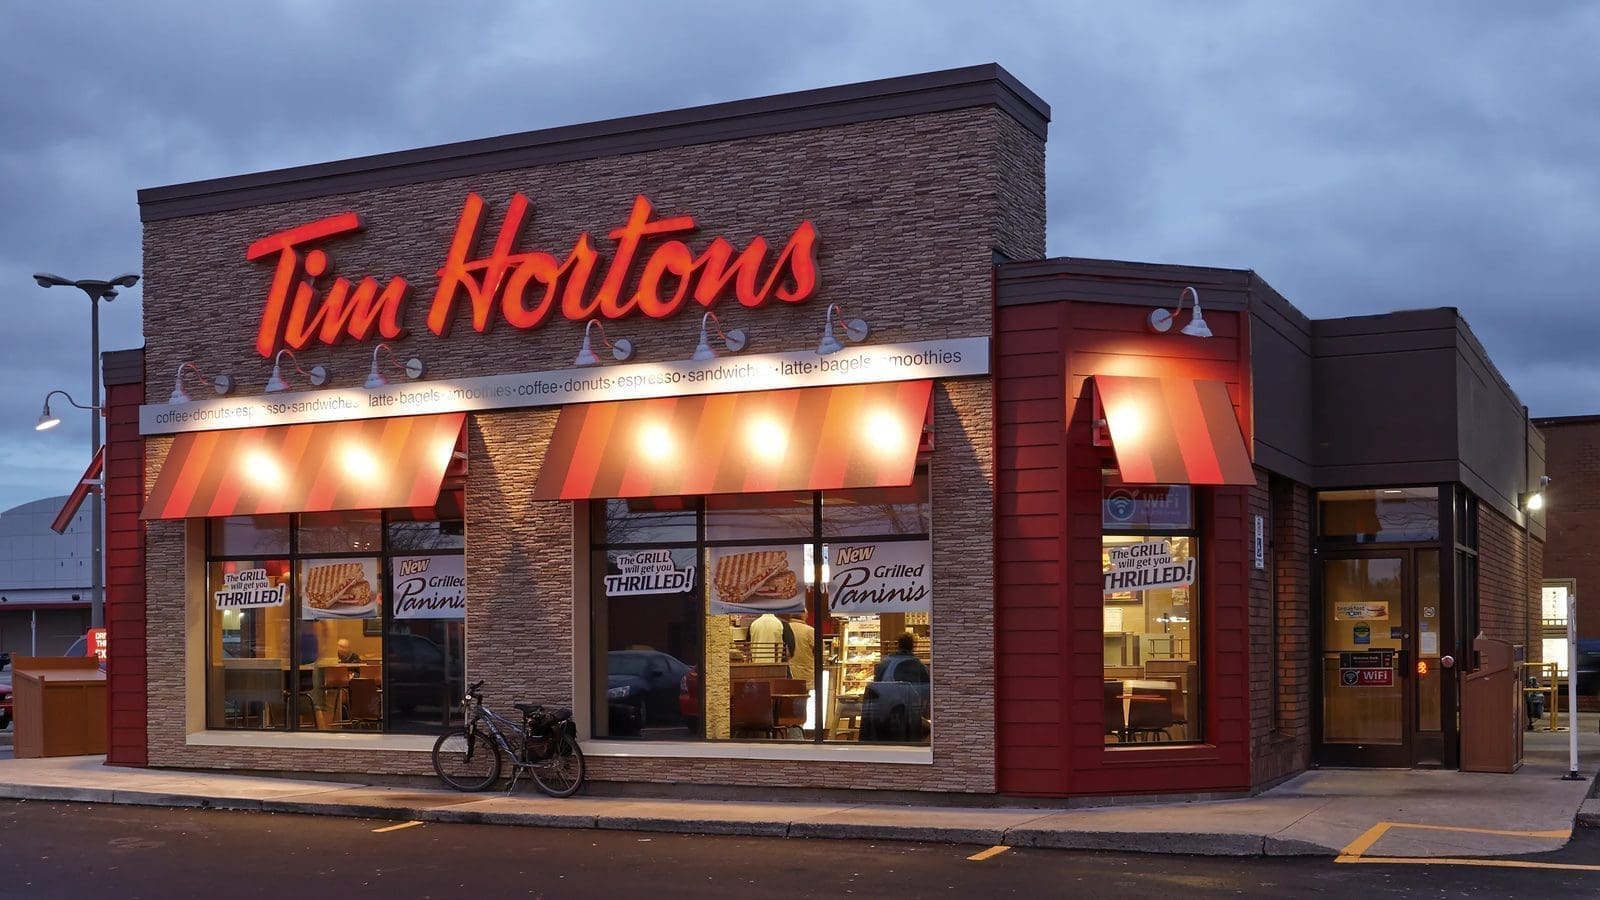 Canadian multinational fast food restaurant chain Tim Hortons to launch in India 